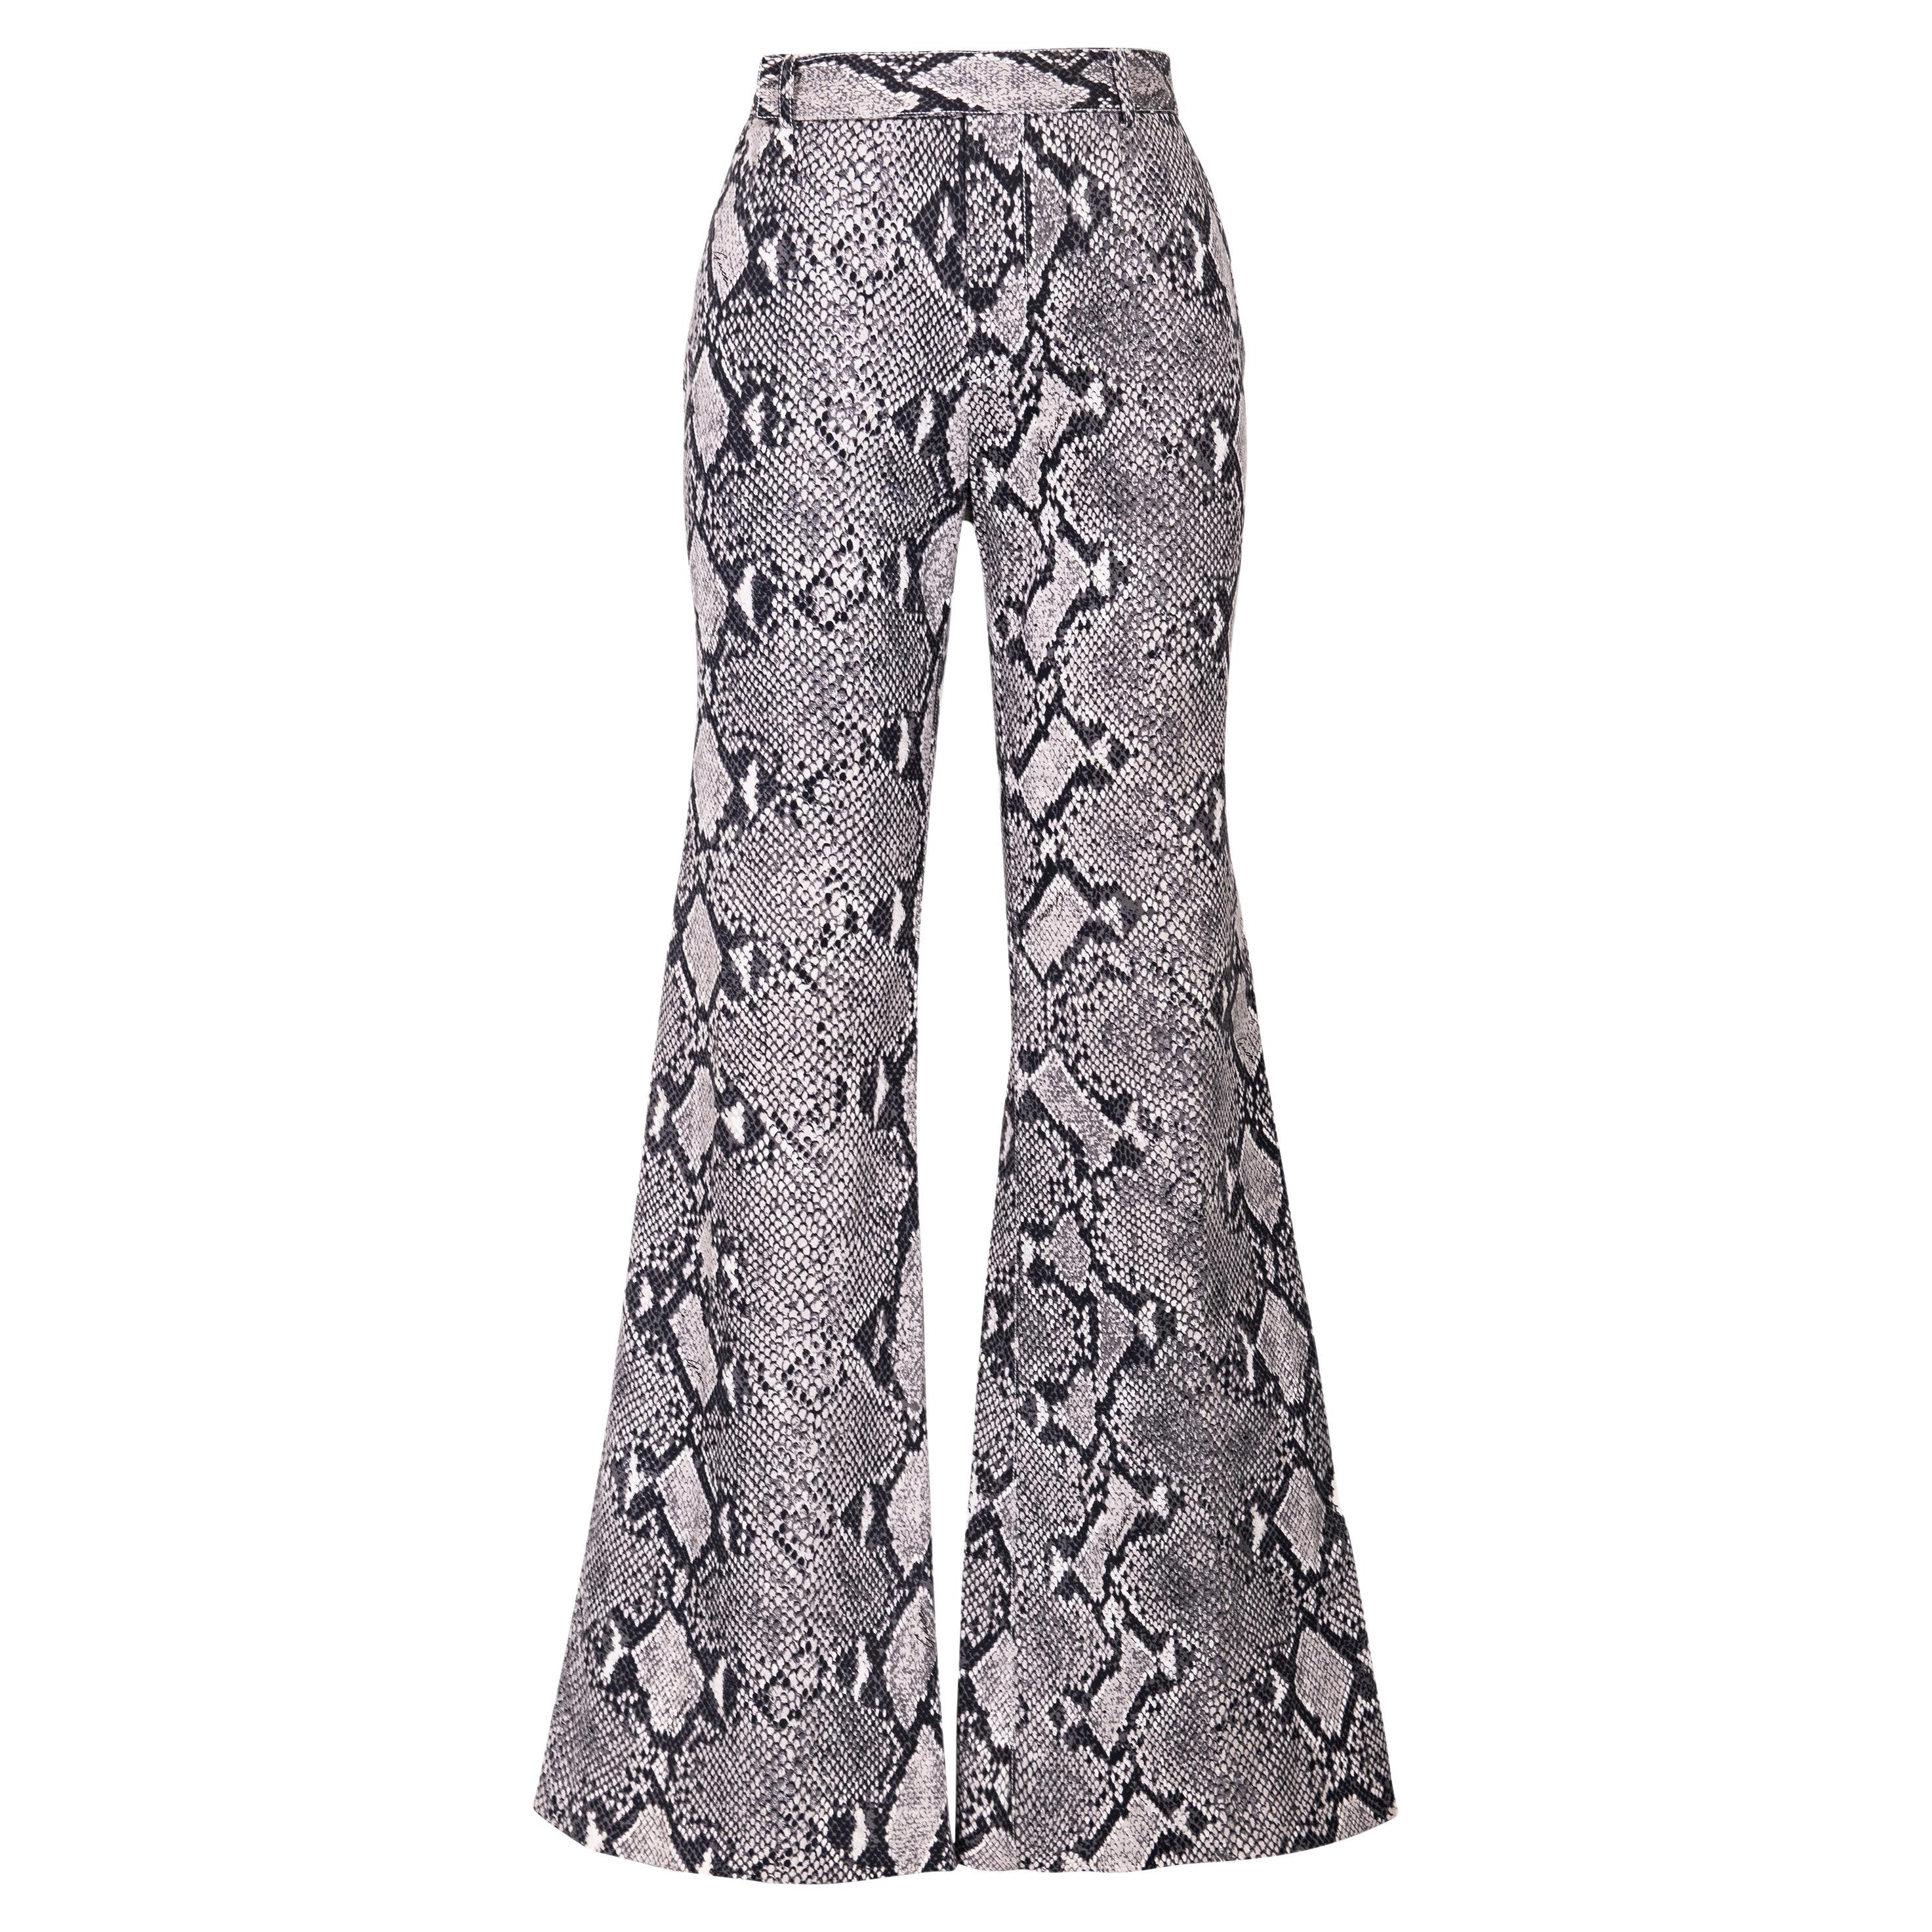 S/S 2000 Gucci by Tom Ford Gray Snakeskin Flare Trousers